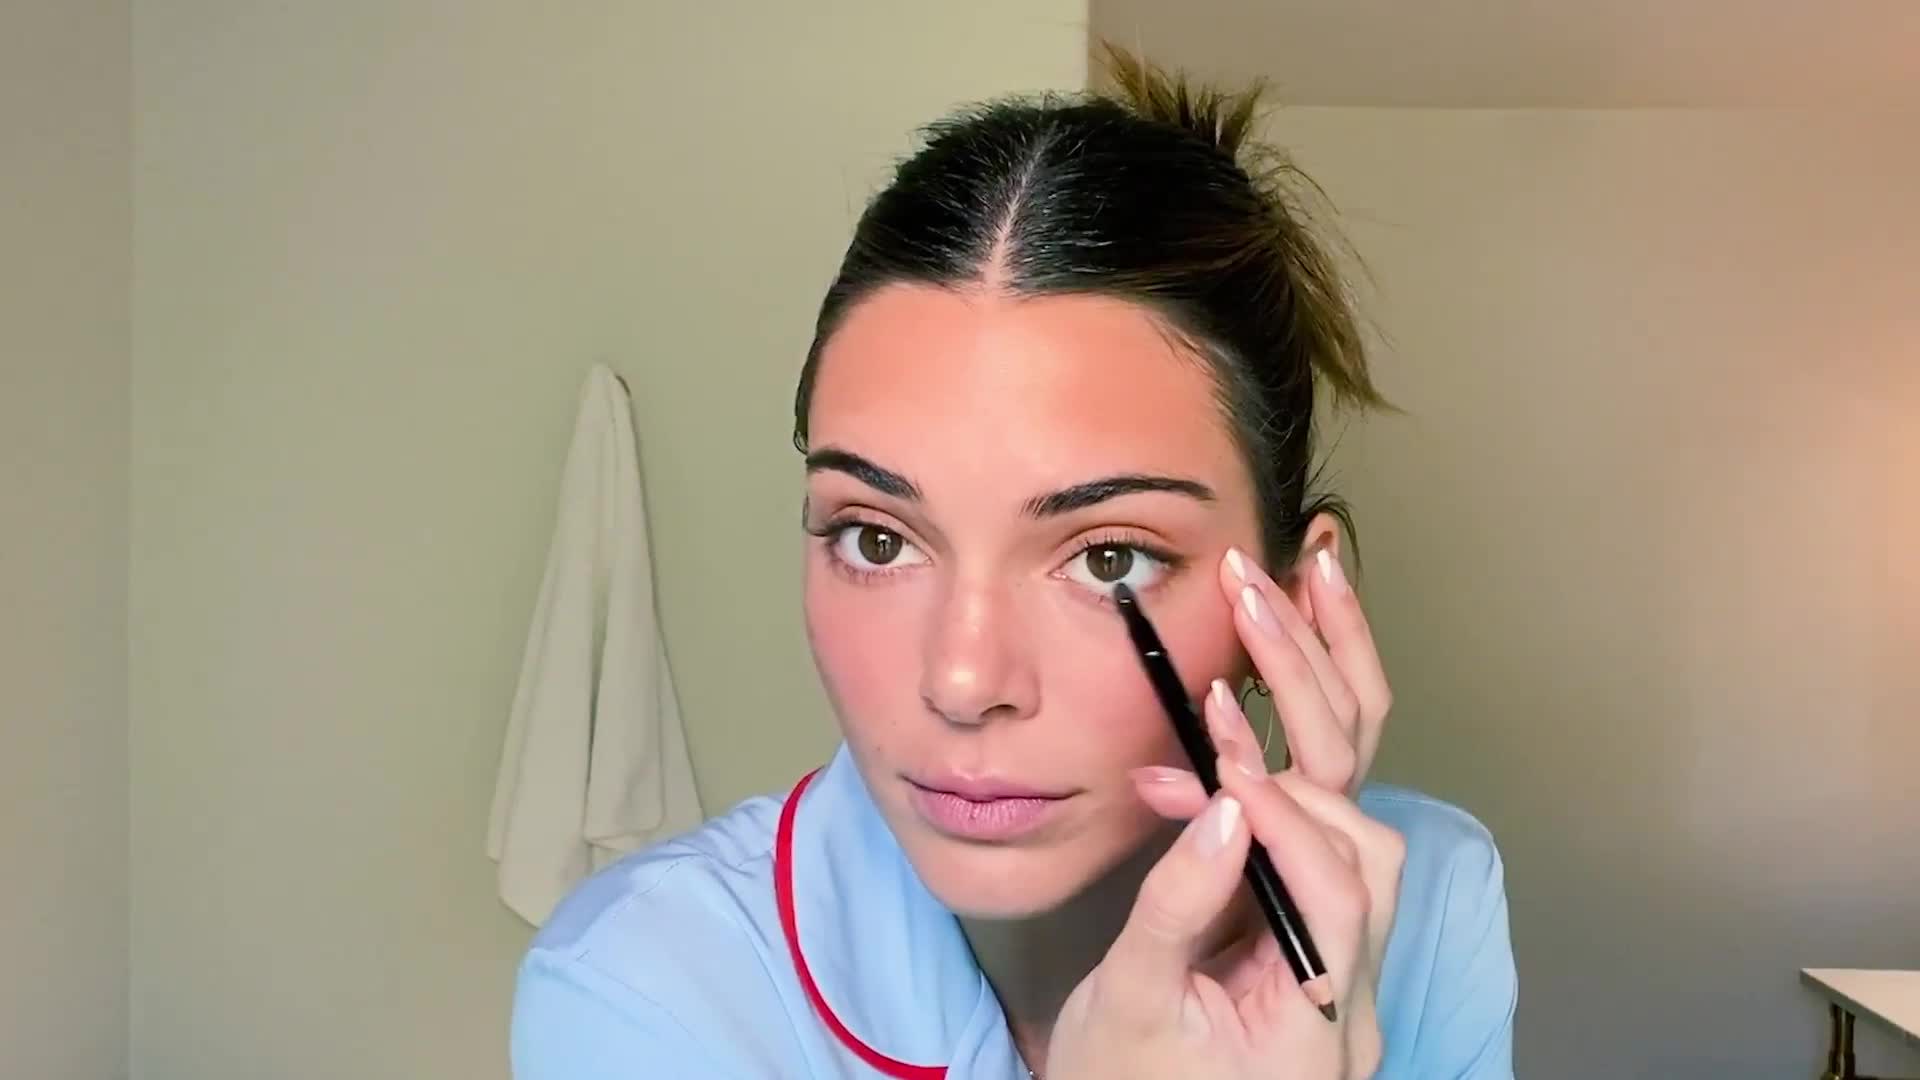 Watch Kendall Jenner on DIY Face Masks, Bronzed Makeup, and the Secret to Achieving Her Signature Pout Beauty Secrets Vogue